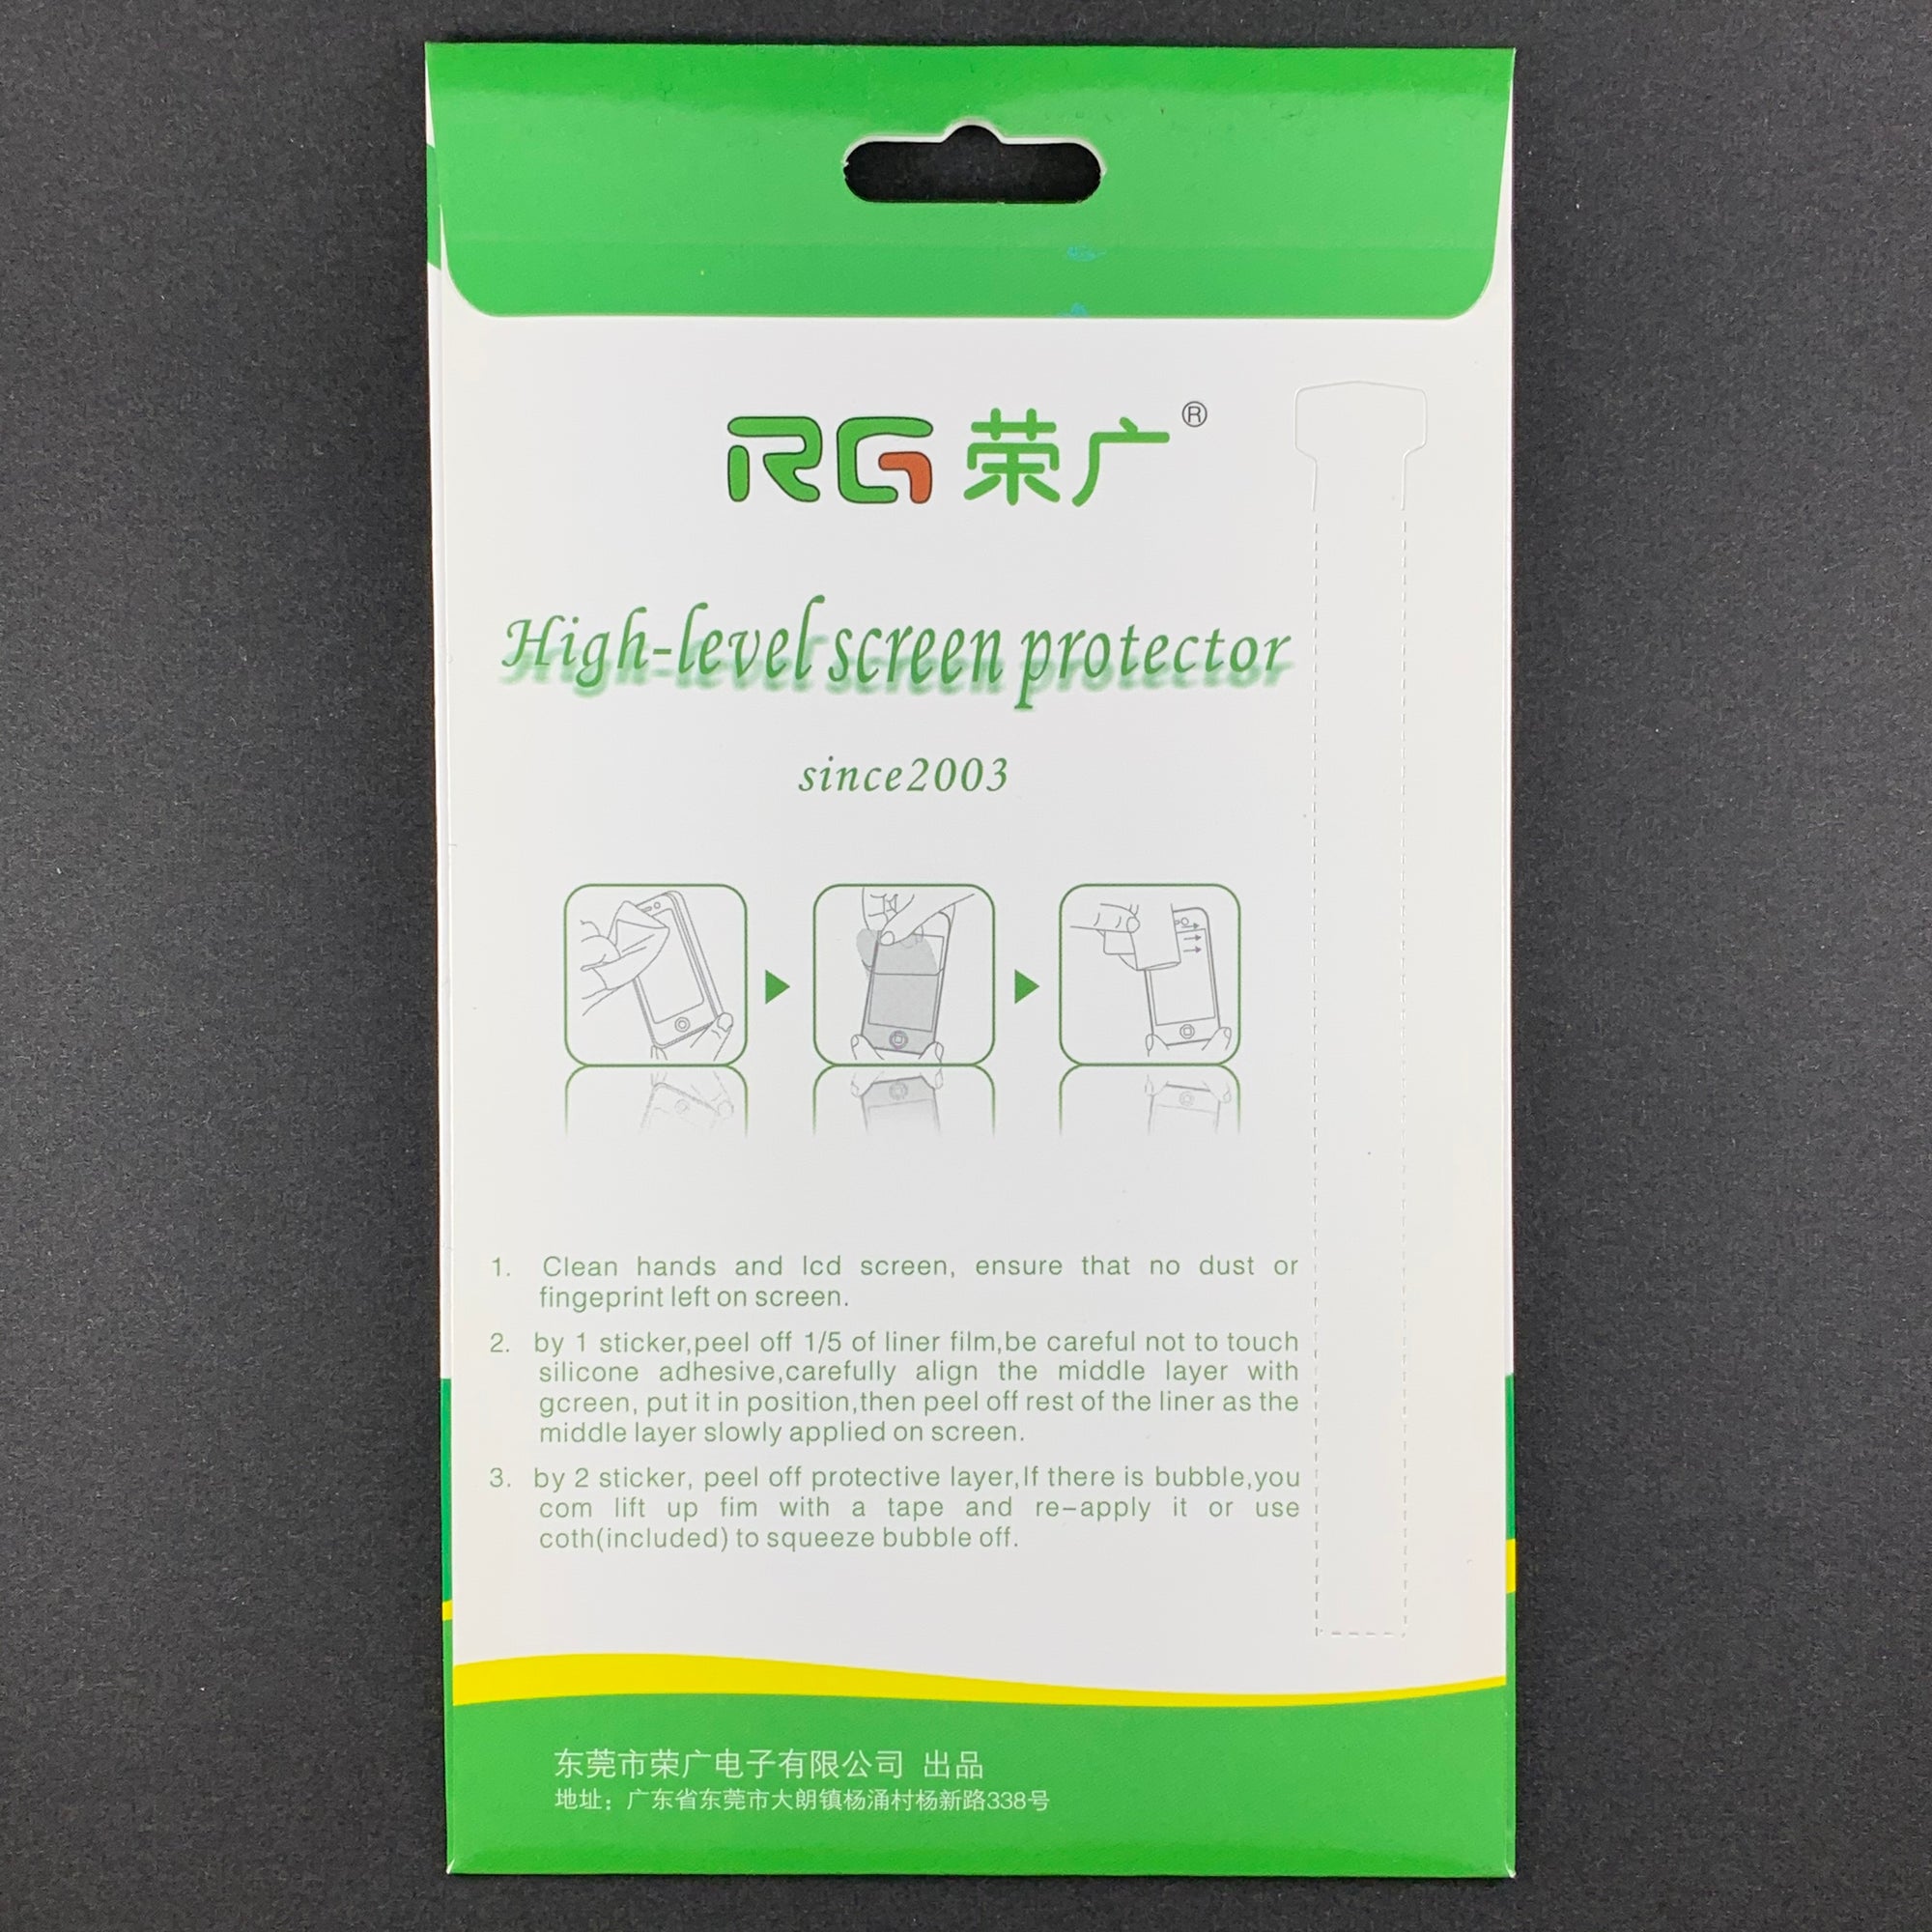 RG Professional Soft Film Screen Protector for iPad Pro 12.9" 1st / 2nd Gen (CLEAR, 2-PACK)